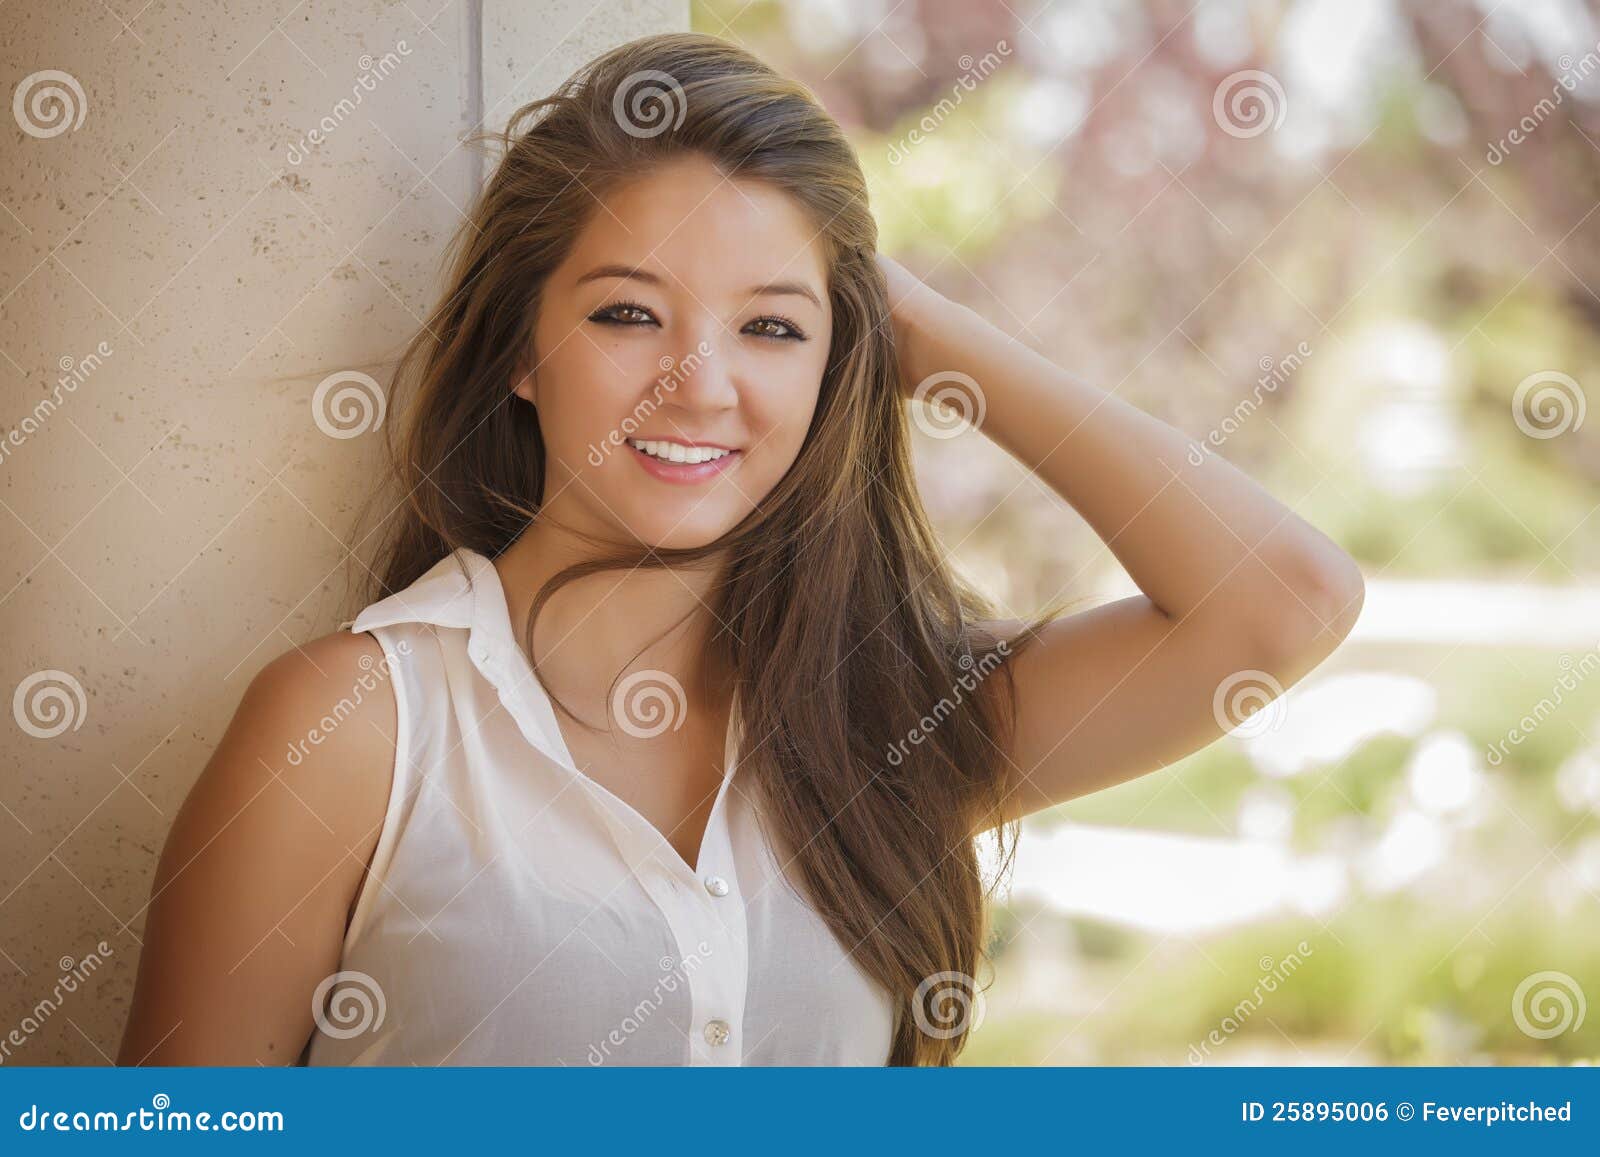 Attractive Teen Mixed Race Girl Portrait Royalty Free Stock Im